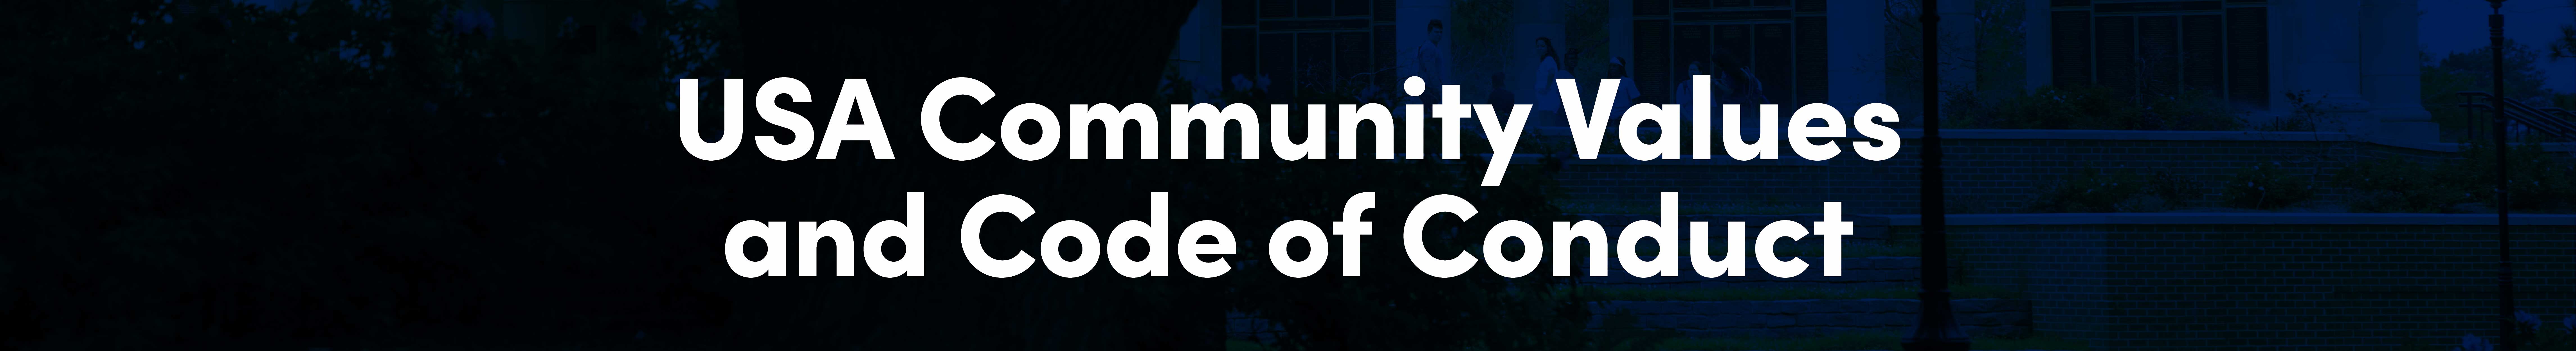 USA Community Values and Code of Conduct